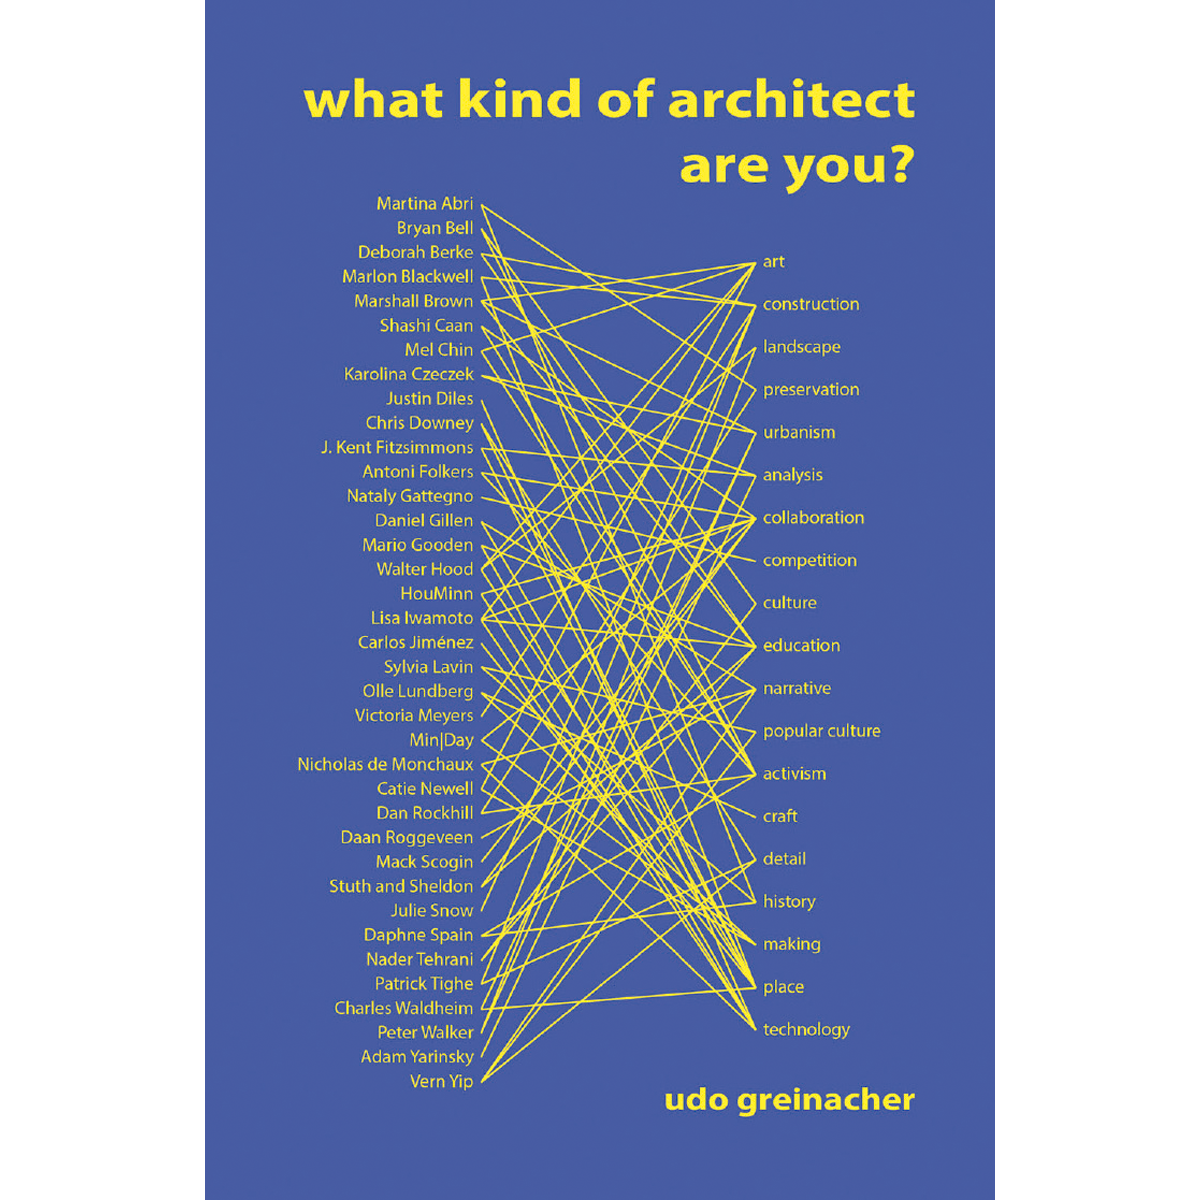 What Kind of Architect Are You?